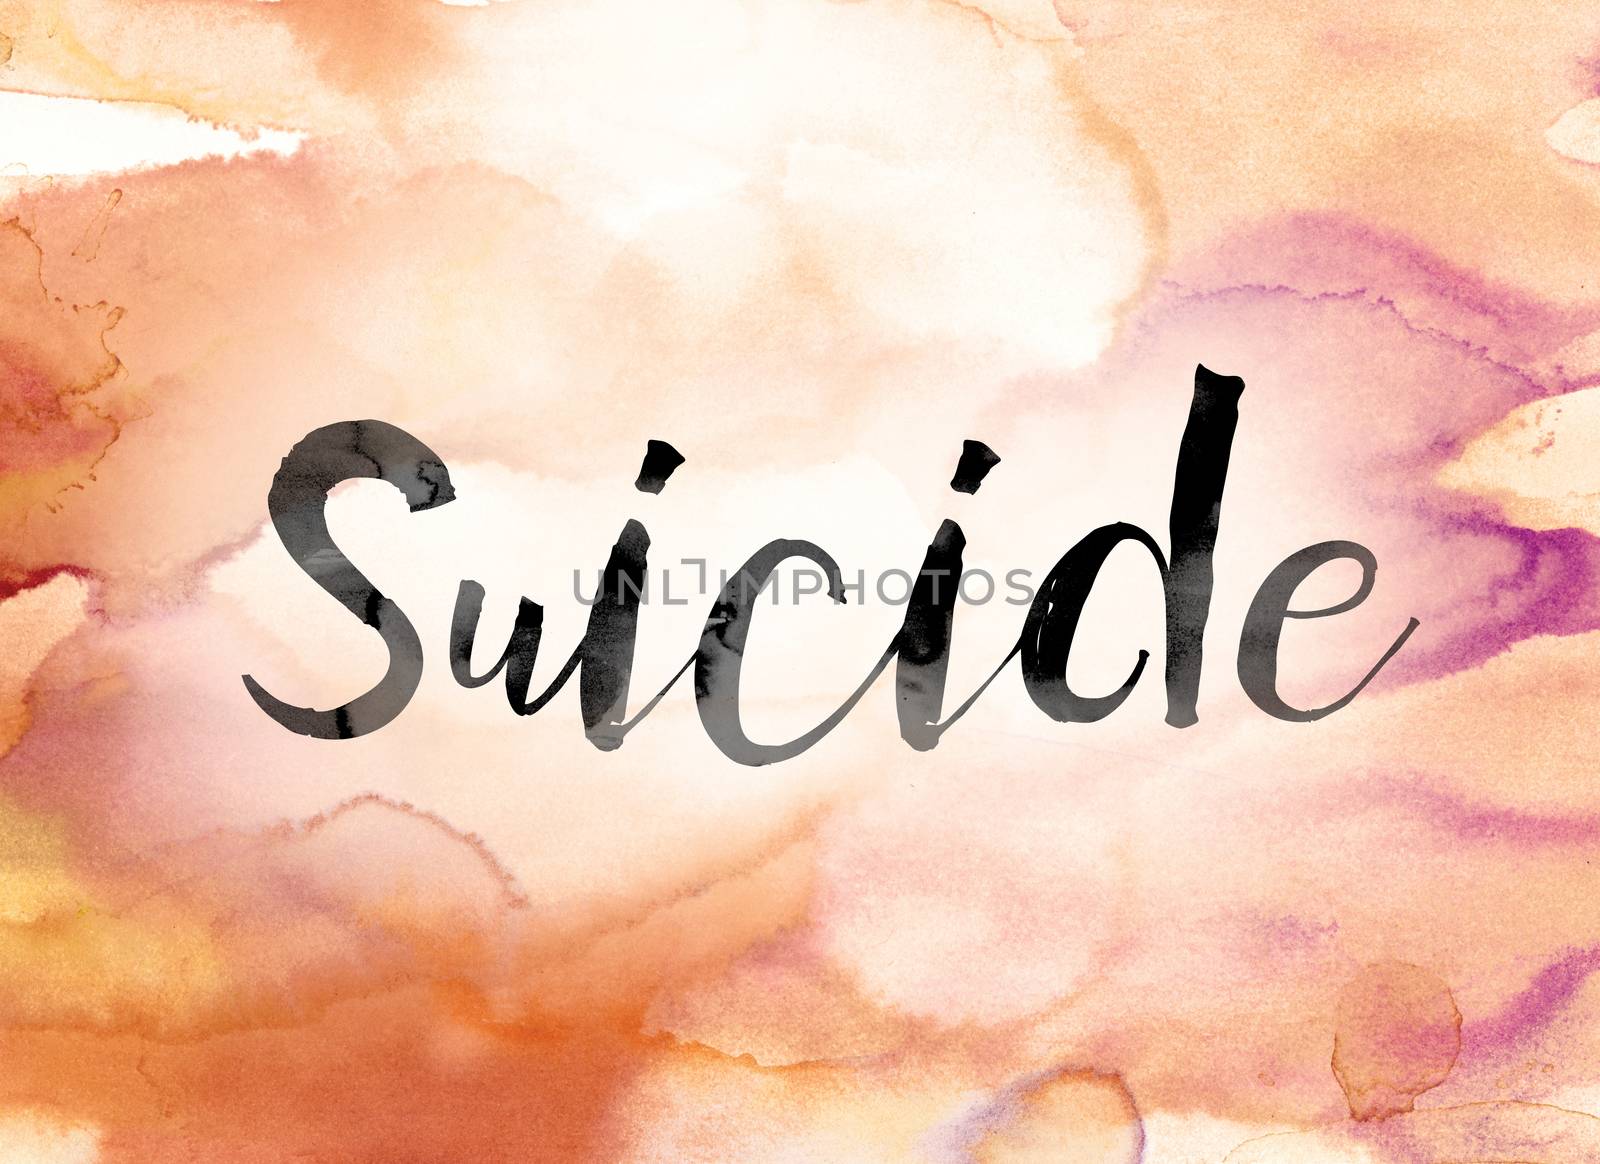 Suicide Colorful Watercolor and Ink Word Art by enterlinedesign